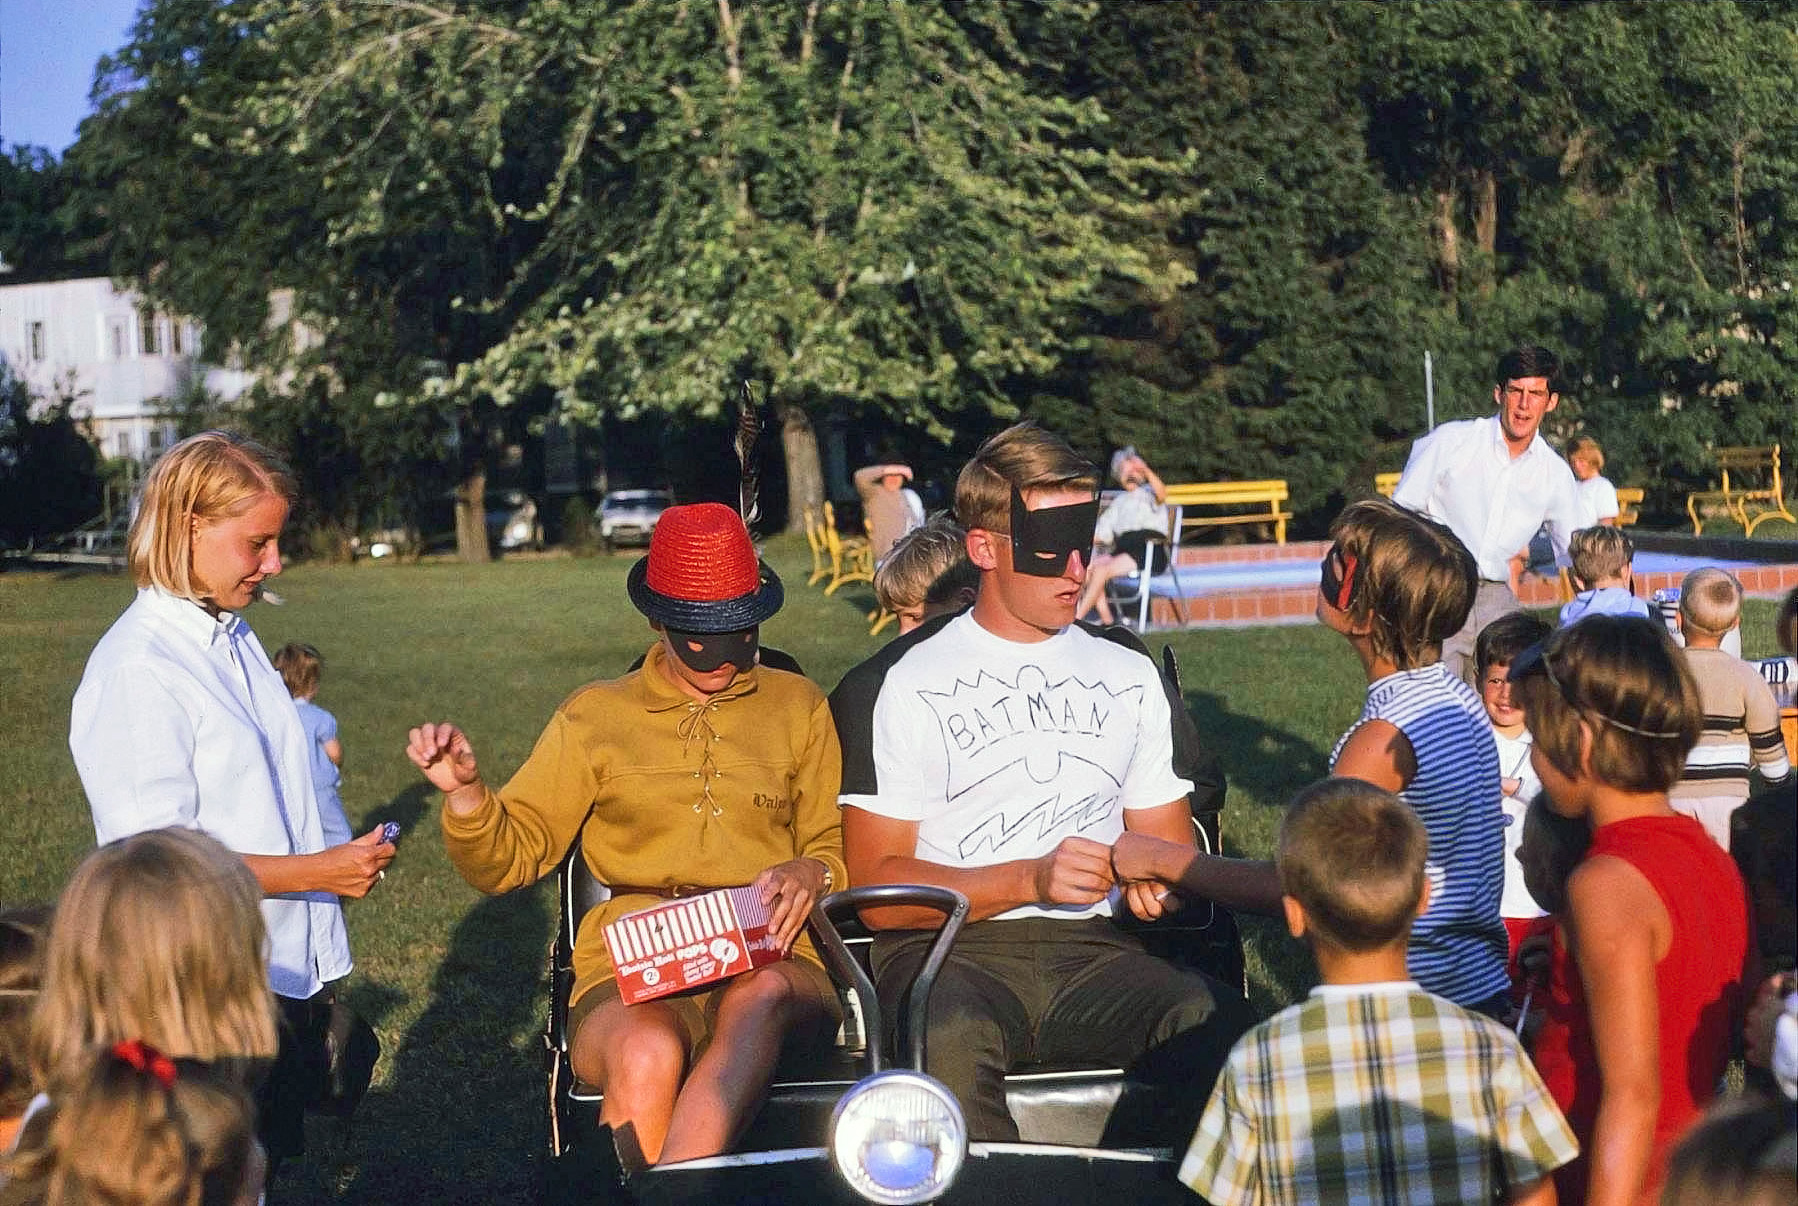 In 1966, when the Batman craze was at its height (due to ABC television series), we kids were thrilled to be in the presence of the Caped Crusaders. This photo was shot by my father, Sol Hurvitz, during a family vacation at Sleepy Hollow Resort in South Haven, Michigan. View full size.